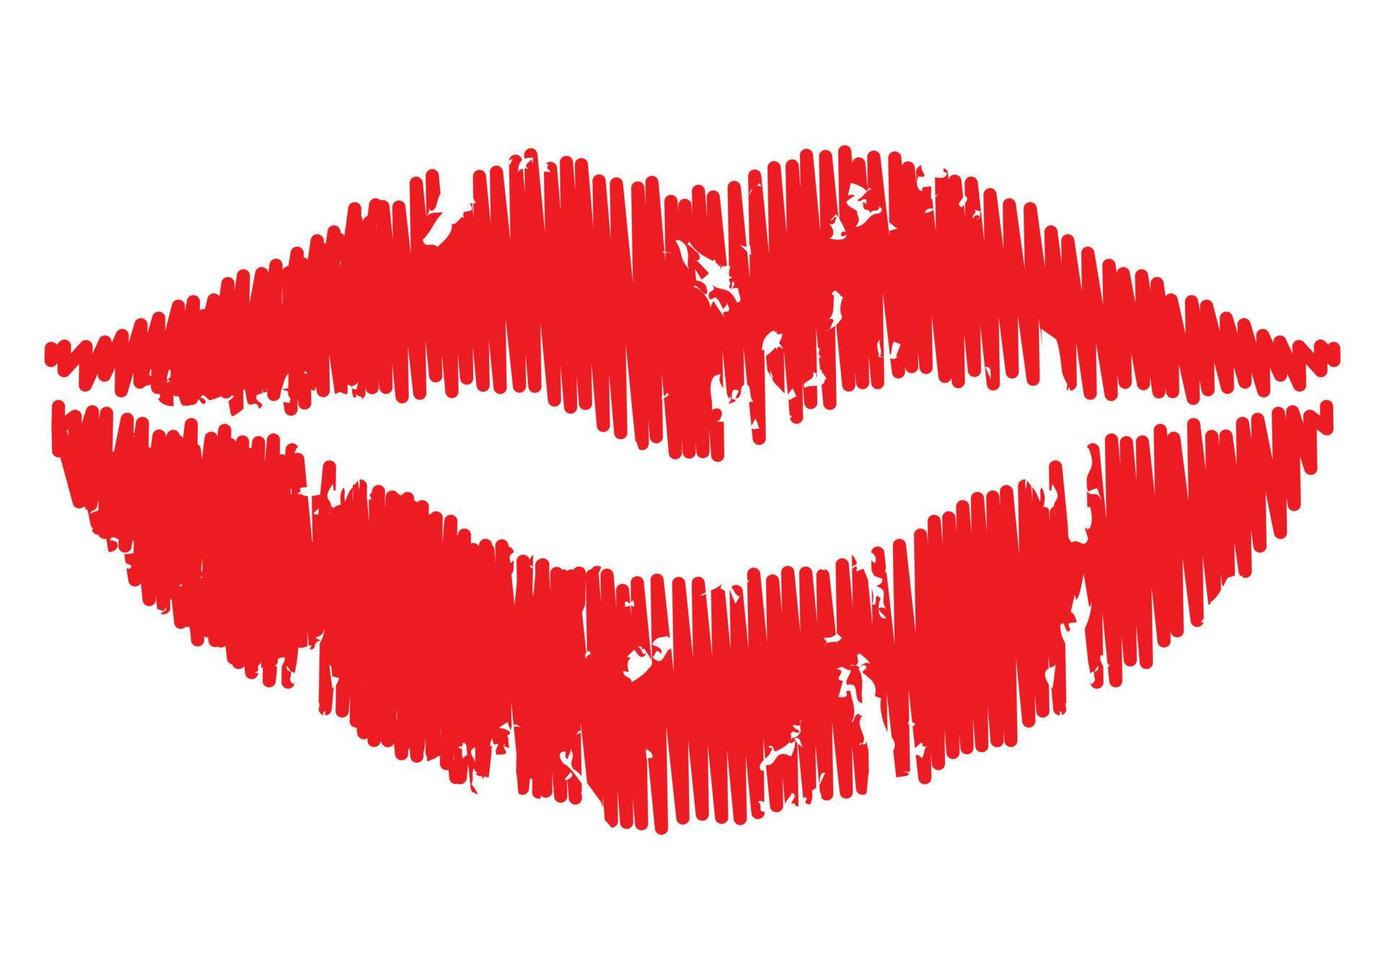 Retro Vintage Red Lips. Vector Illustration of Kissing lips. Concept for Valentine's Day